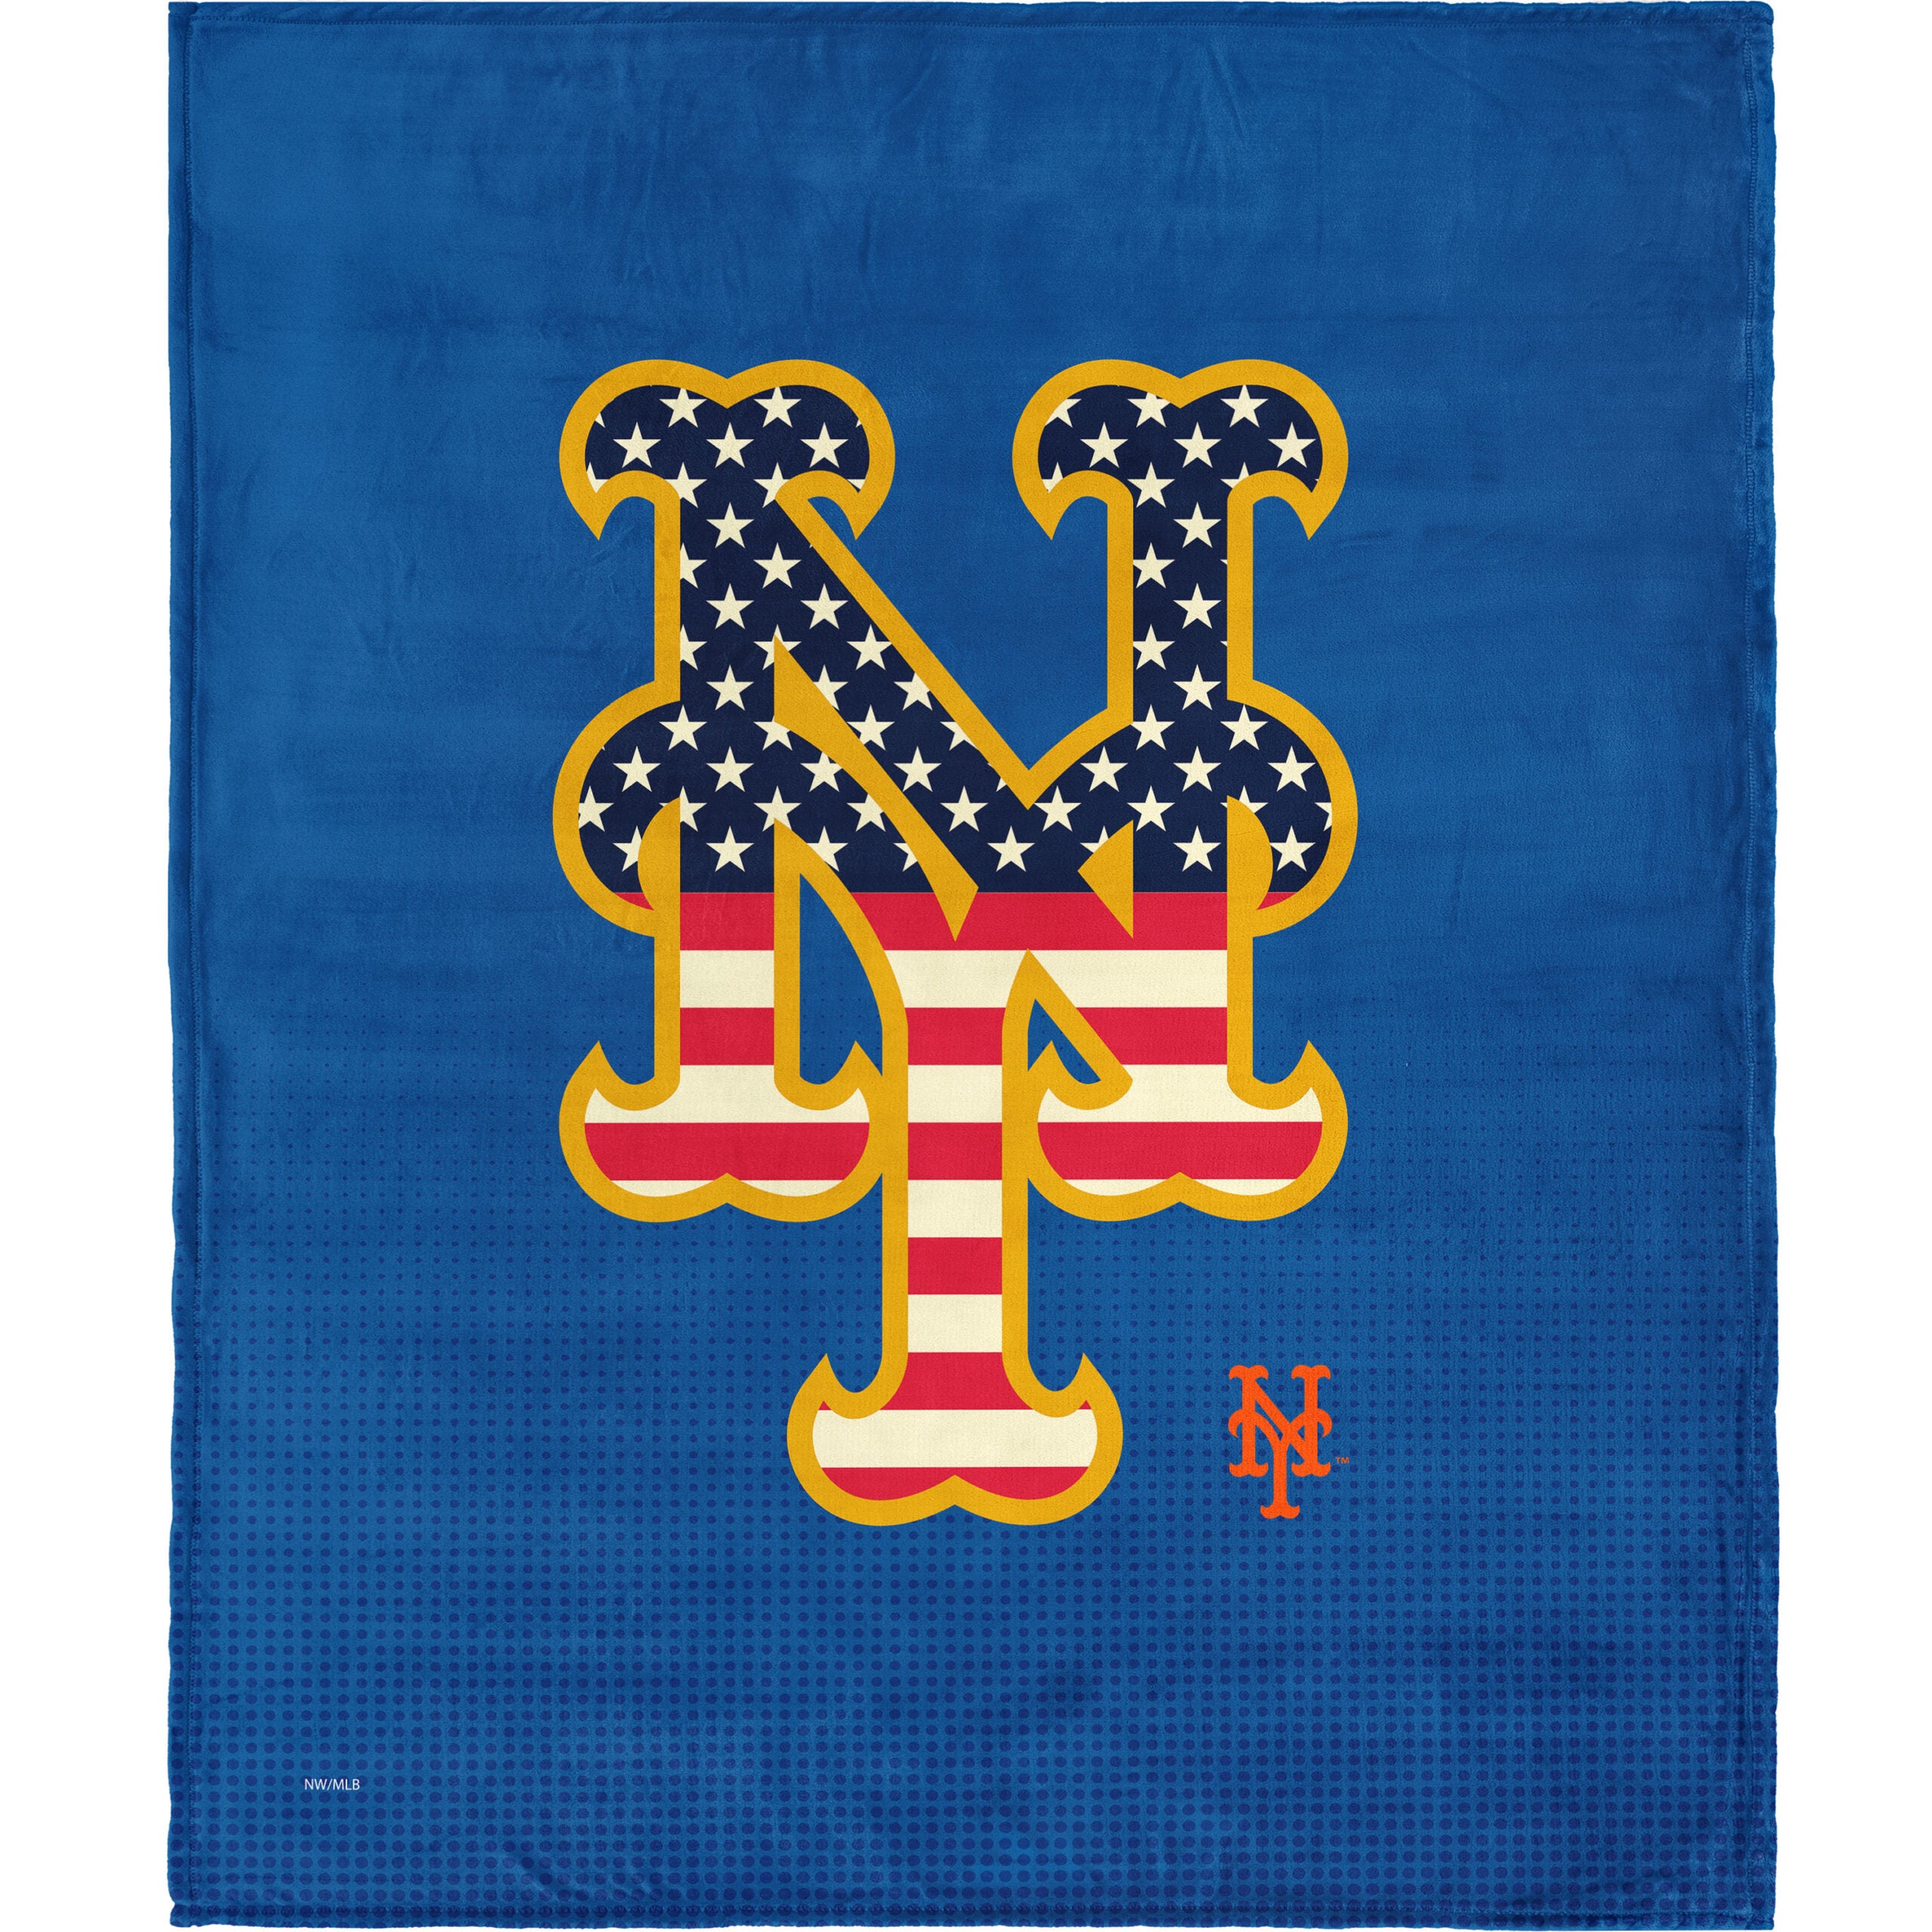 MLB New York Mets Celebrate Series Silk Touch Throw Blanket 50x60 Inches